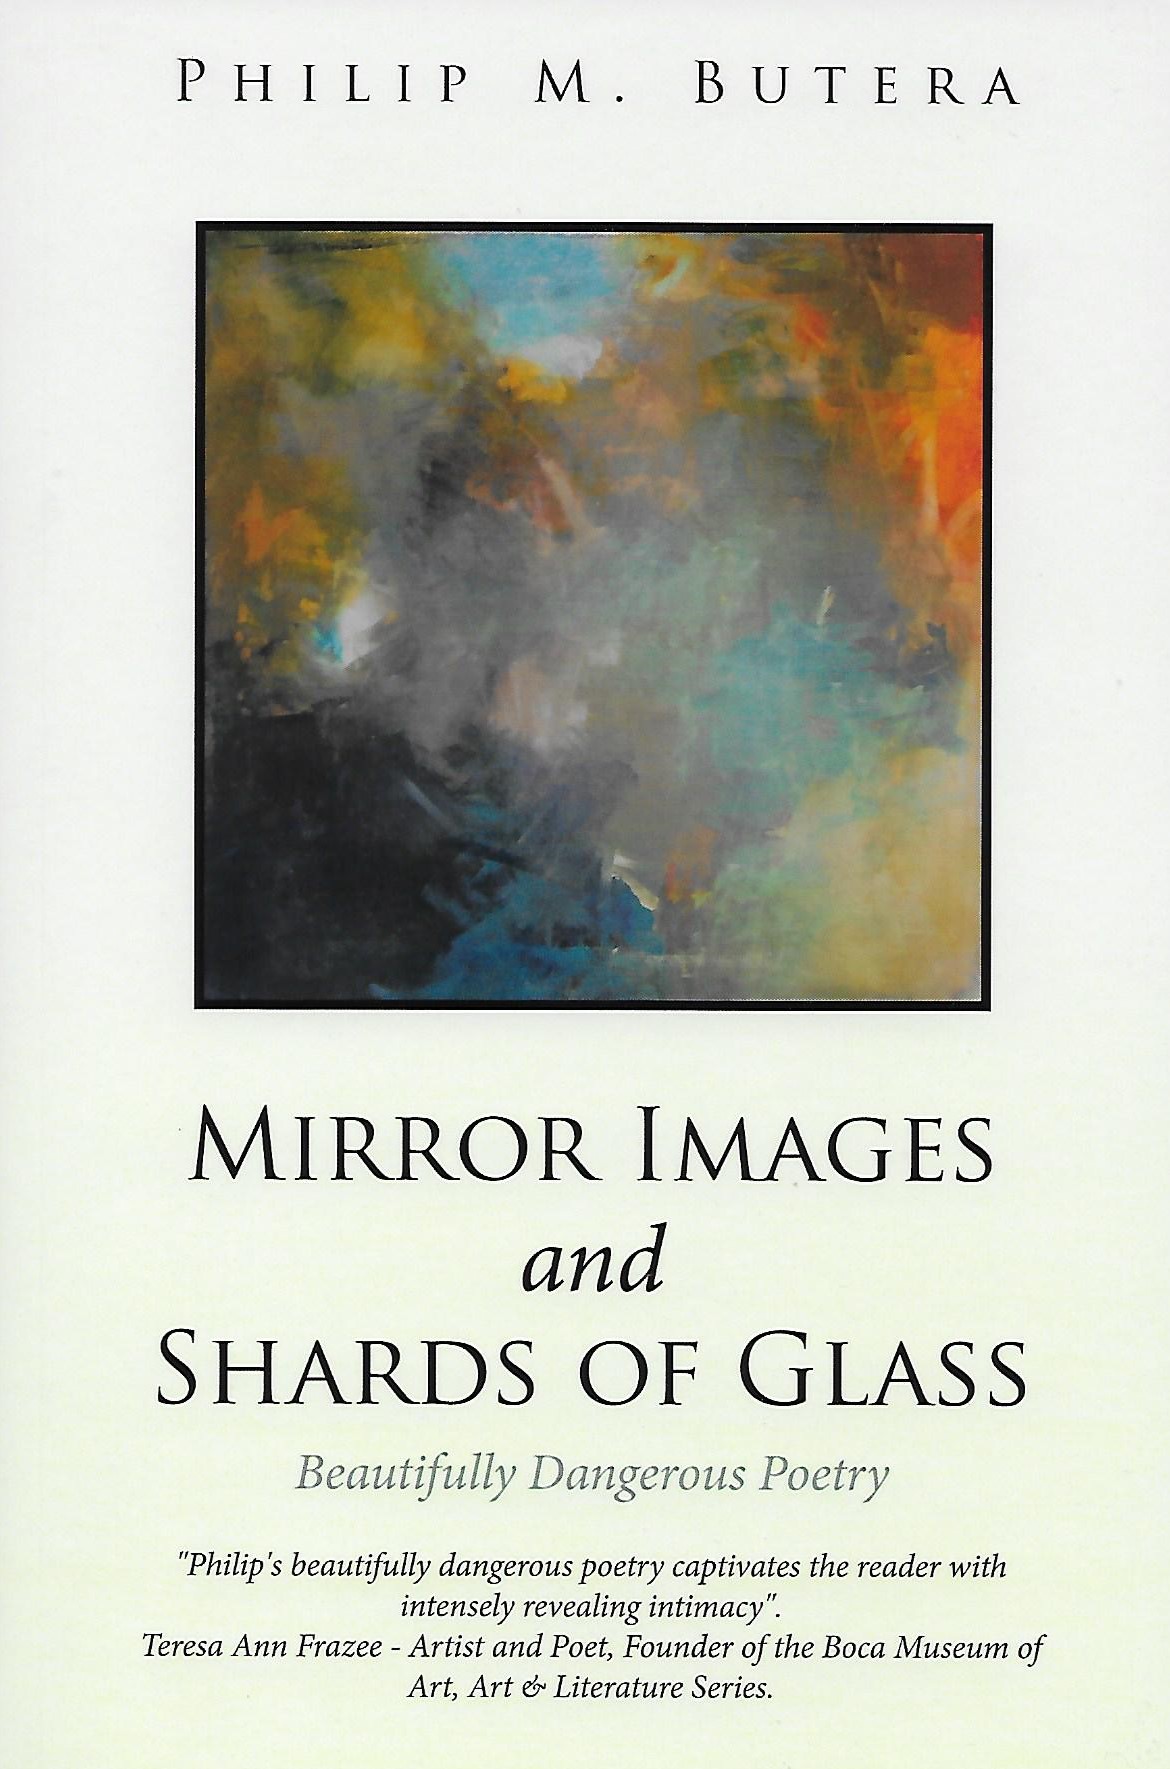 Mirror Images and Chards of Glass by Philip Butera